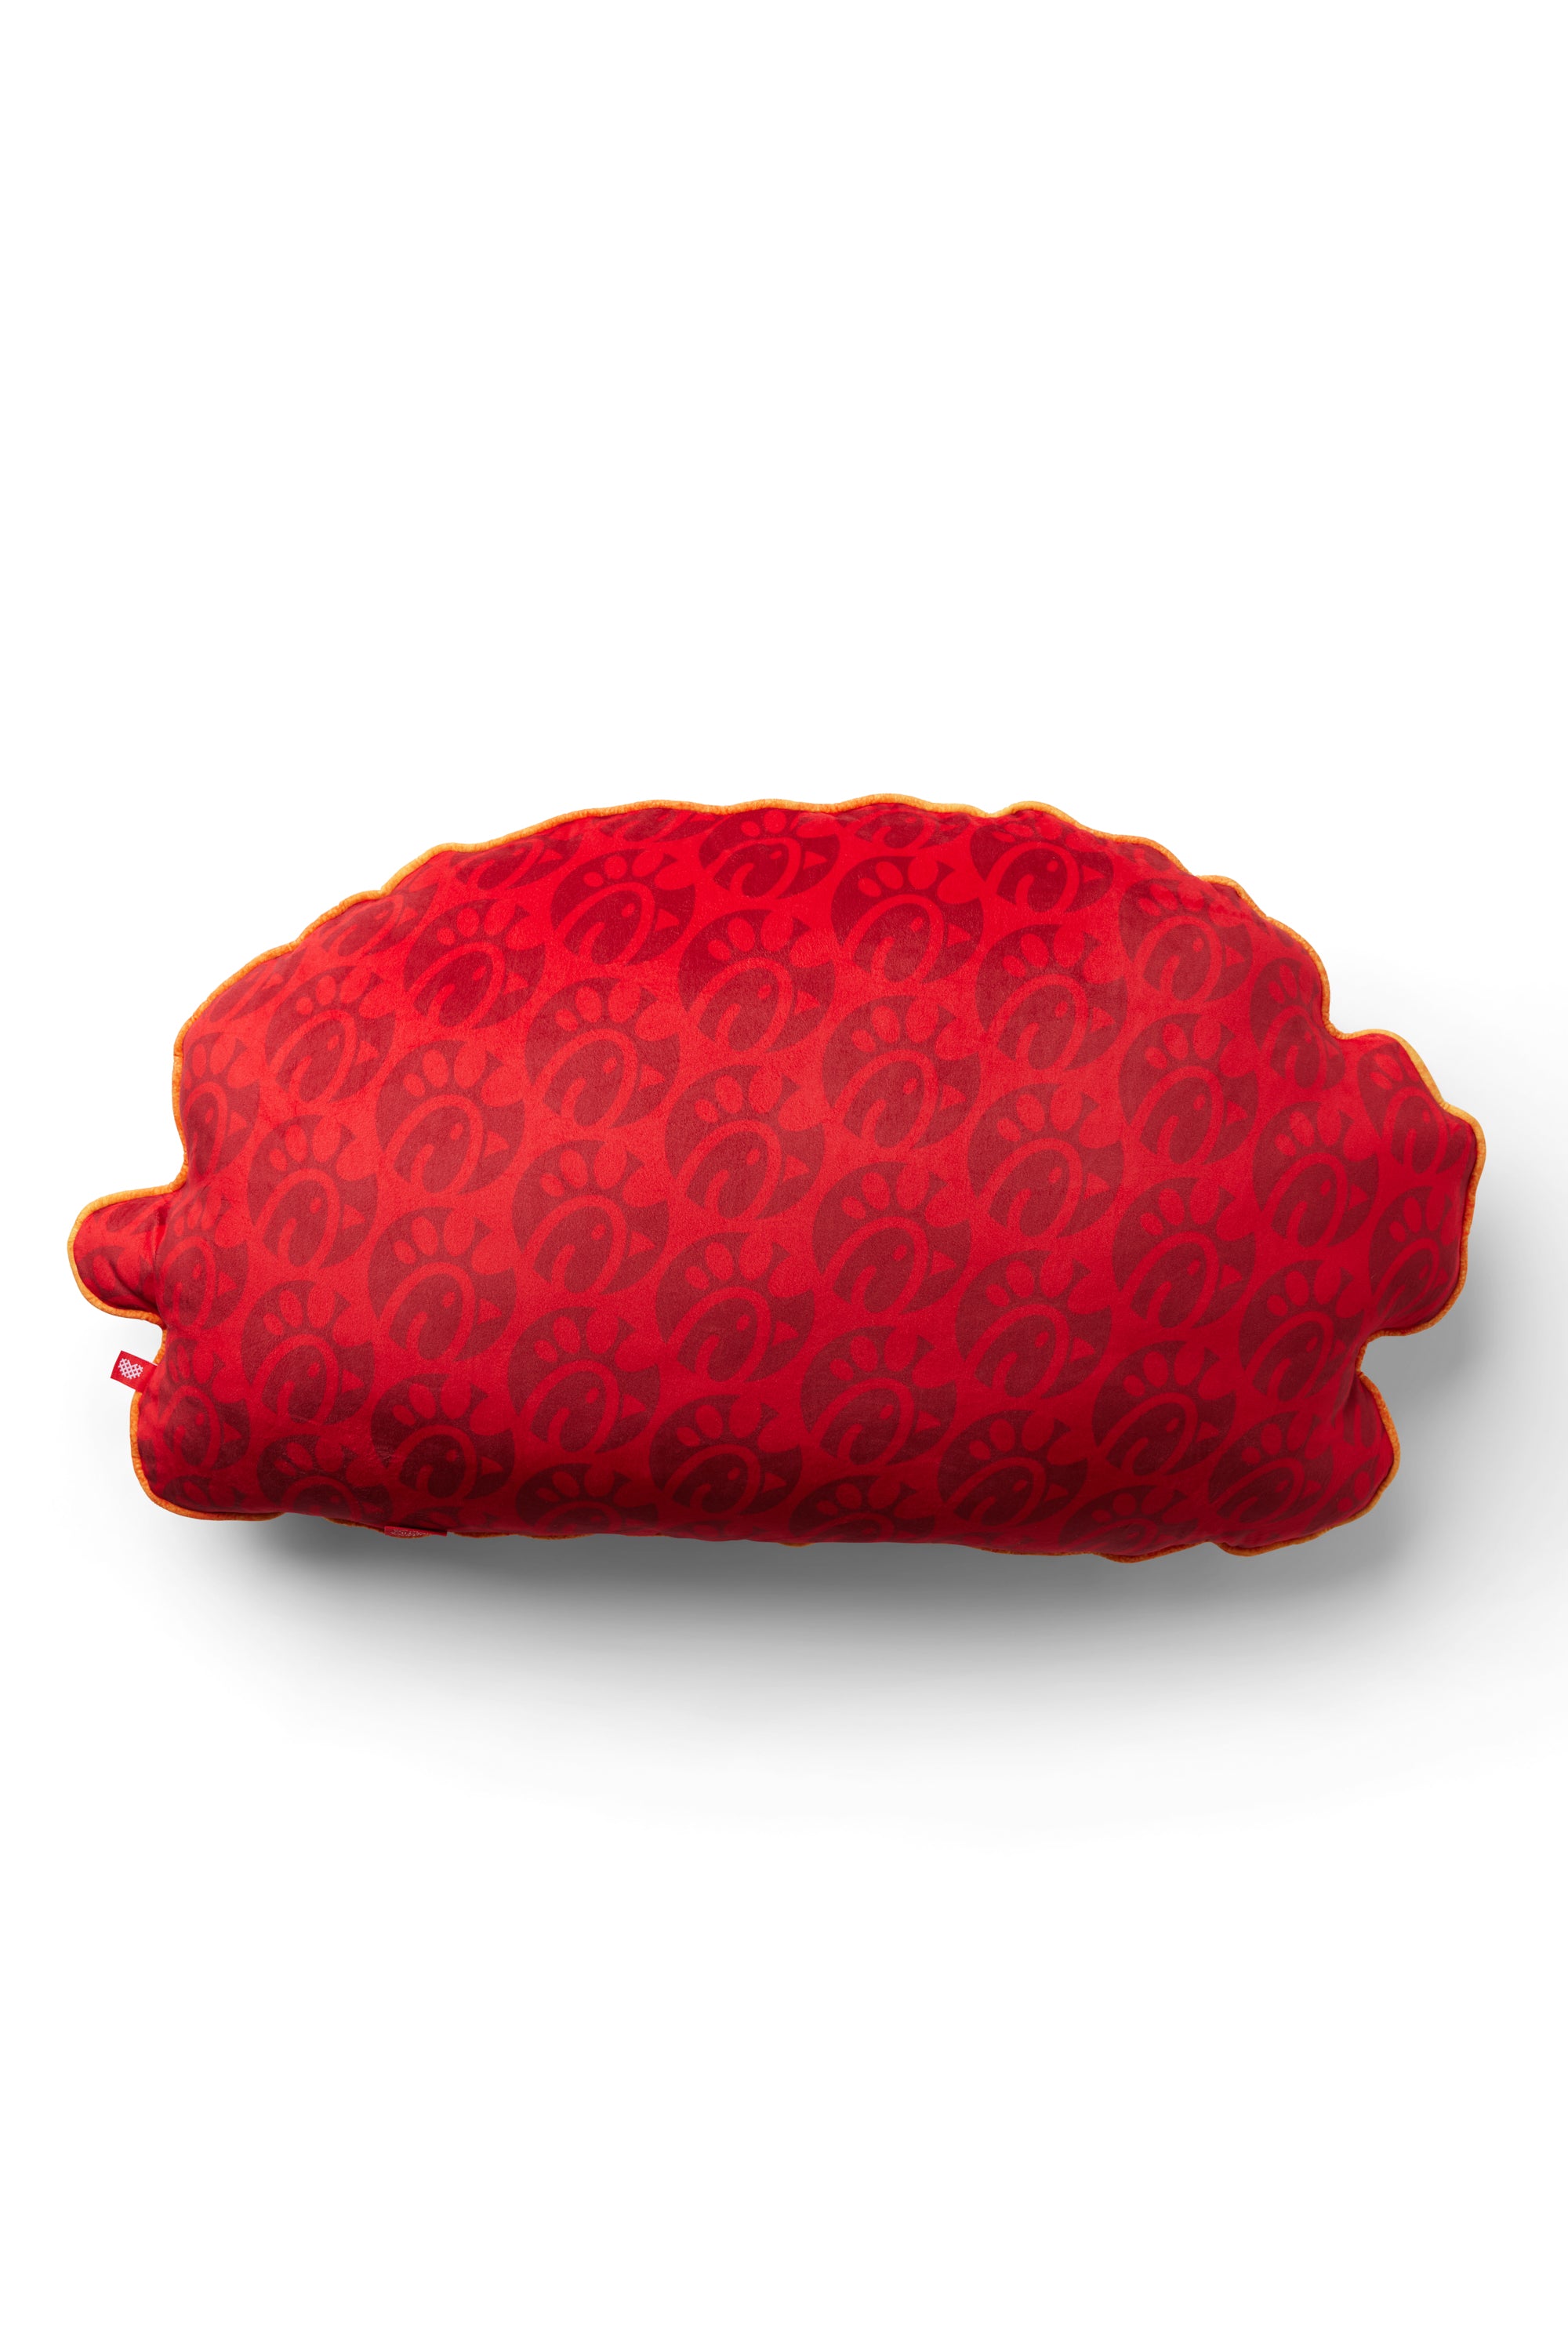  Back of Oversized Original Chick-fil-A® Chicken Sandwich Pillow with red Chick-fil-A logo pattern